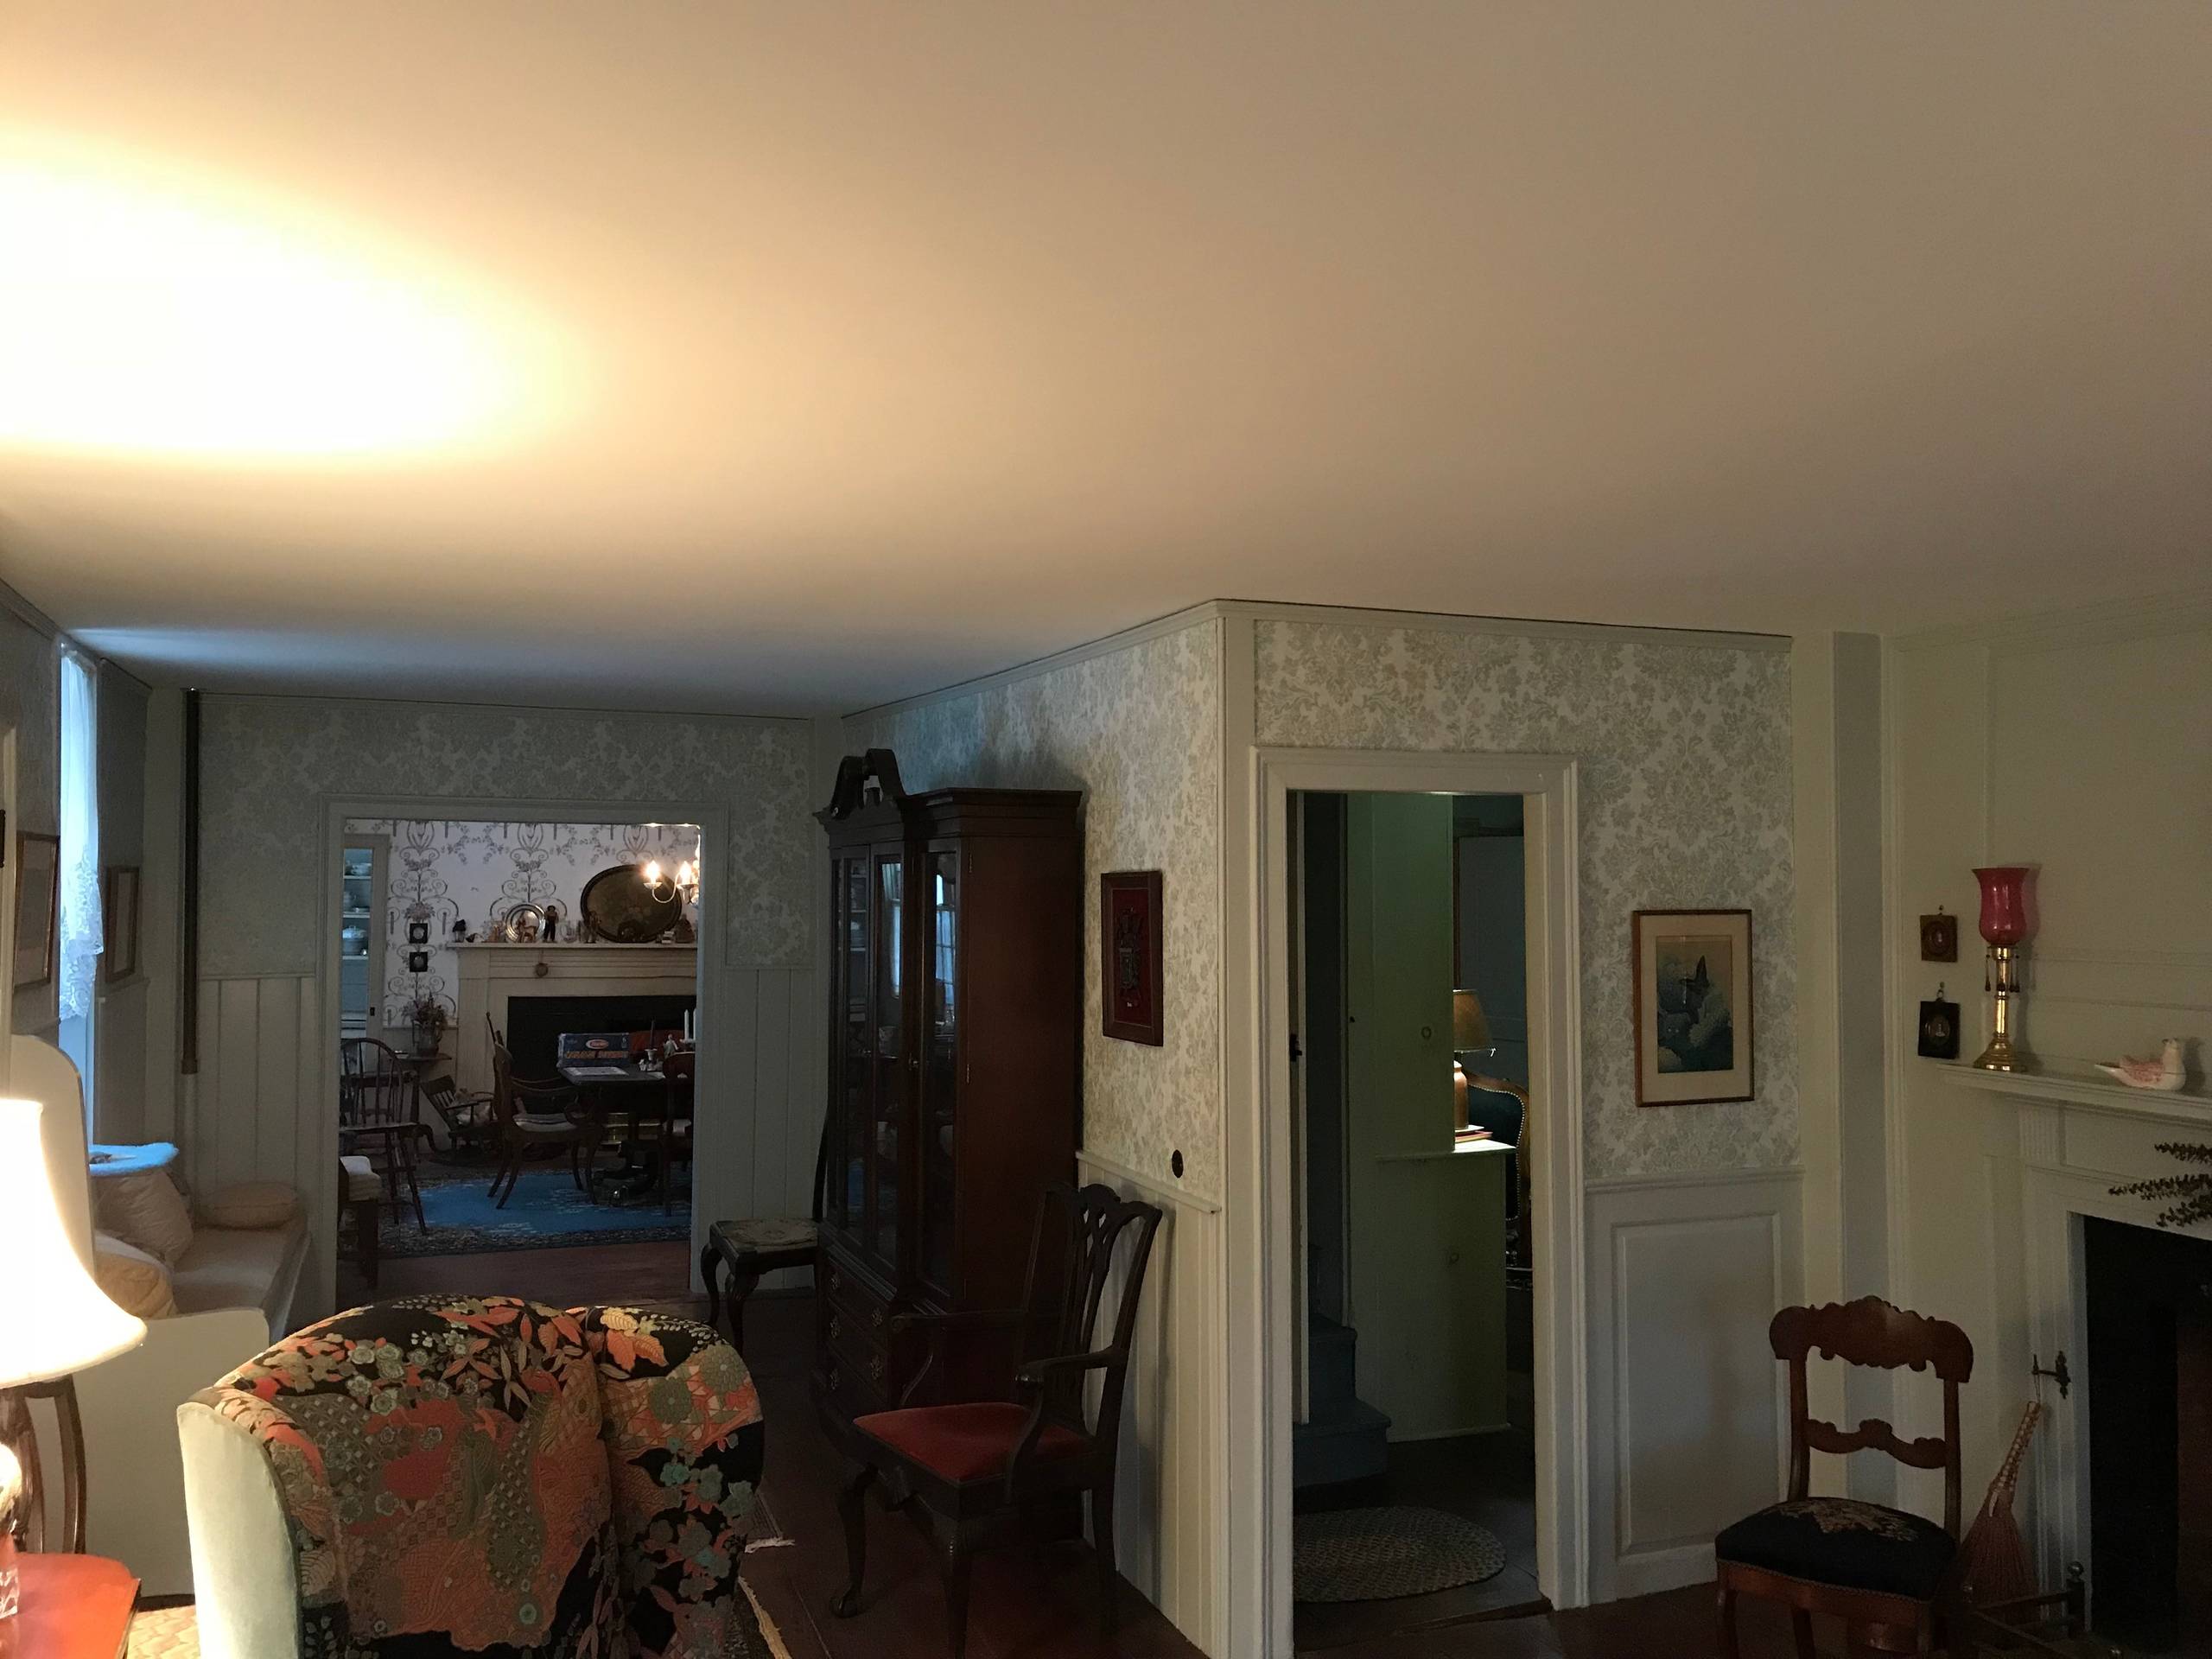 1780's Historic Home Ceiling Repair and Painting Project